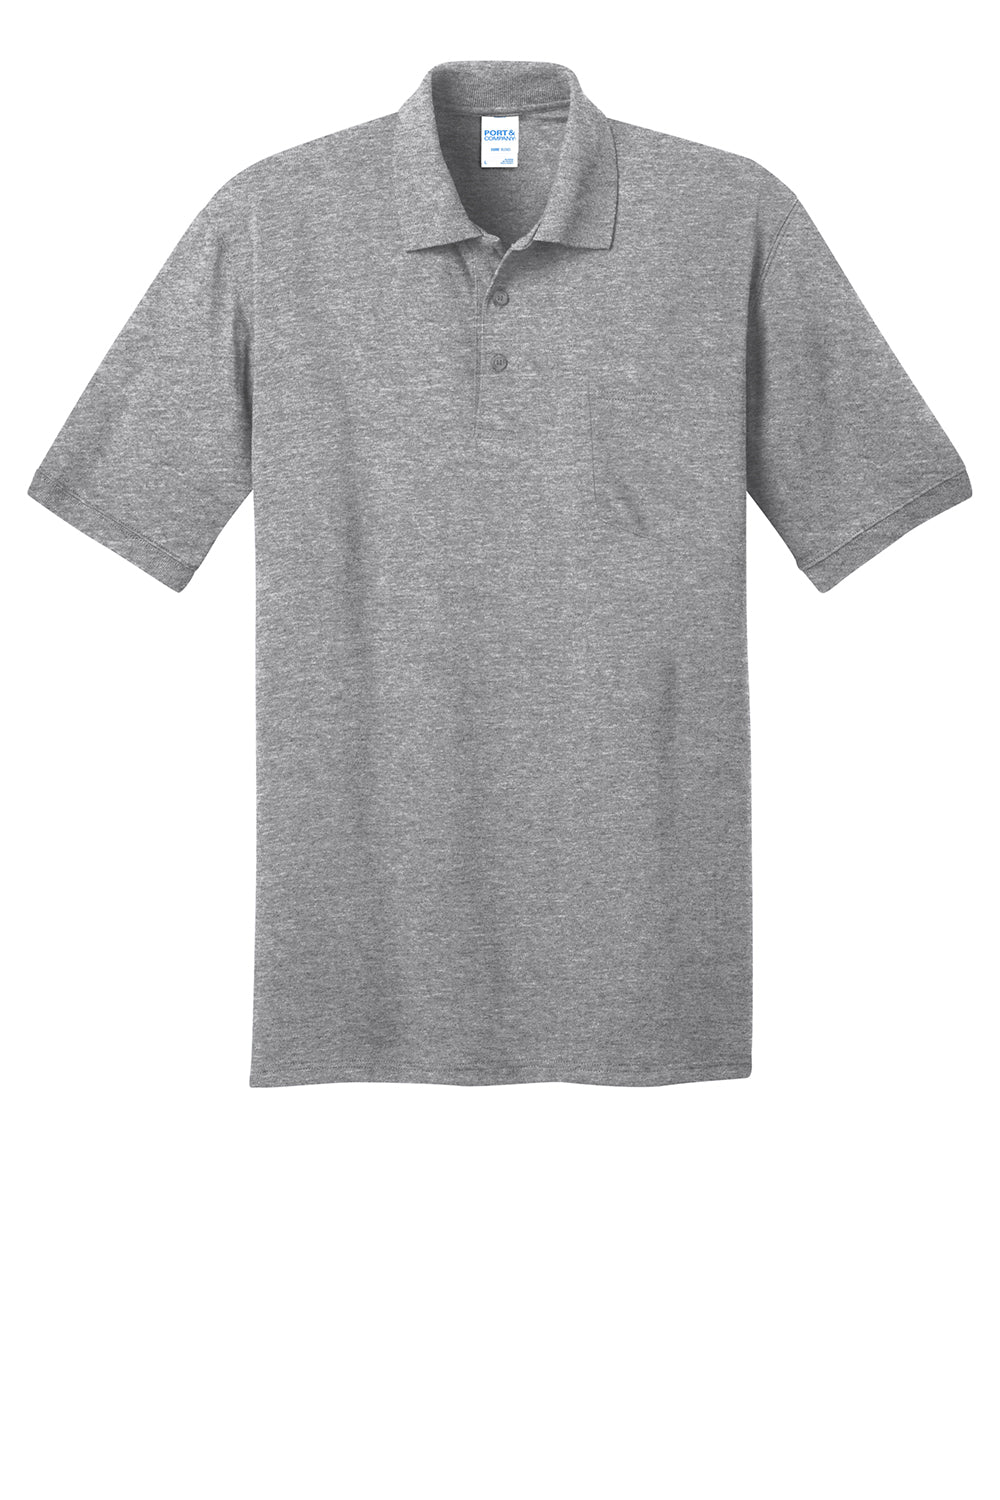 Port & Company KP55P Mens Core Stain Resistant Short Sleeve Polo Shirt w/ Pocket Heather Grey Flat Front